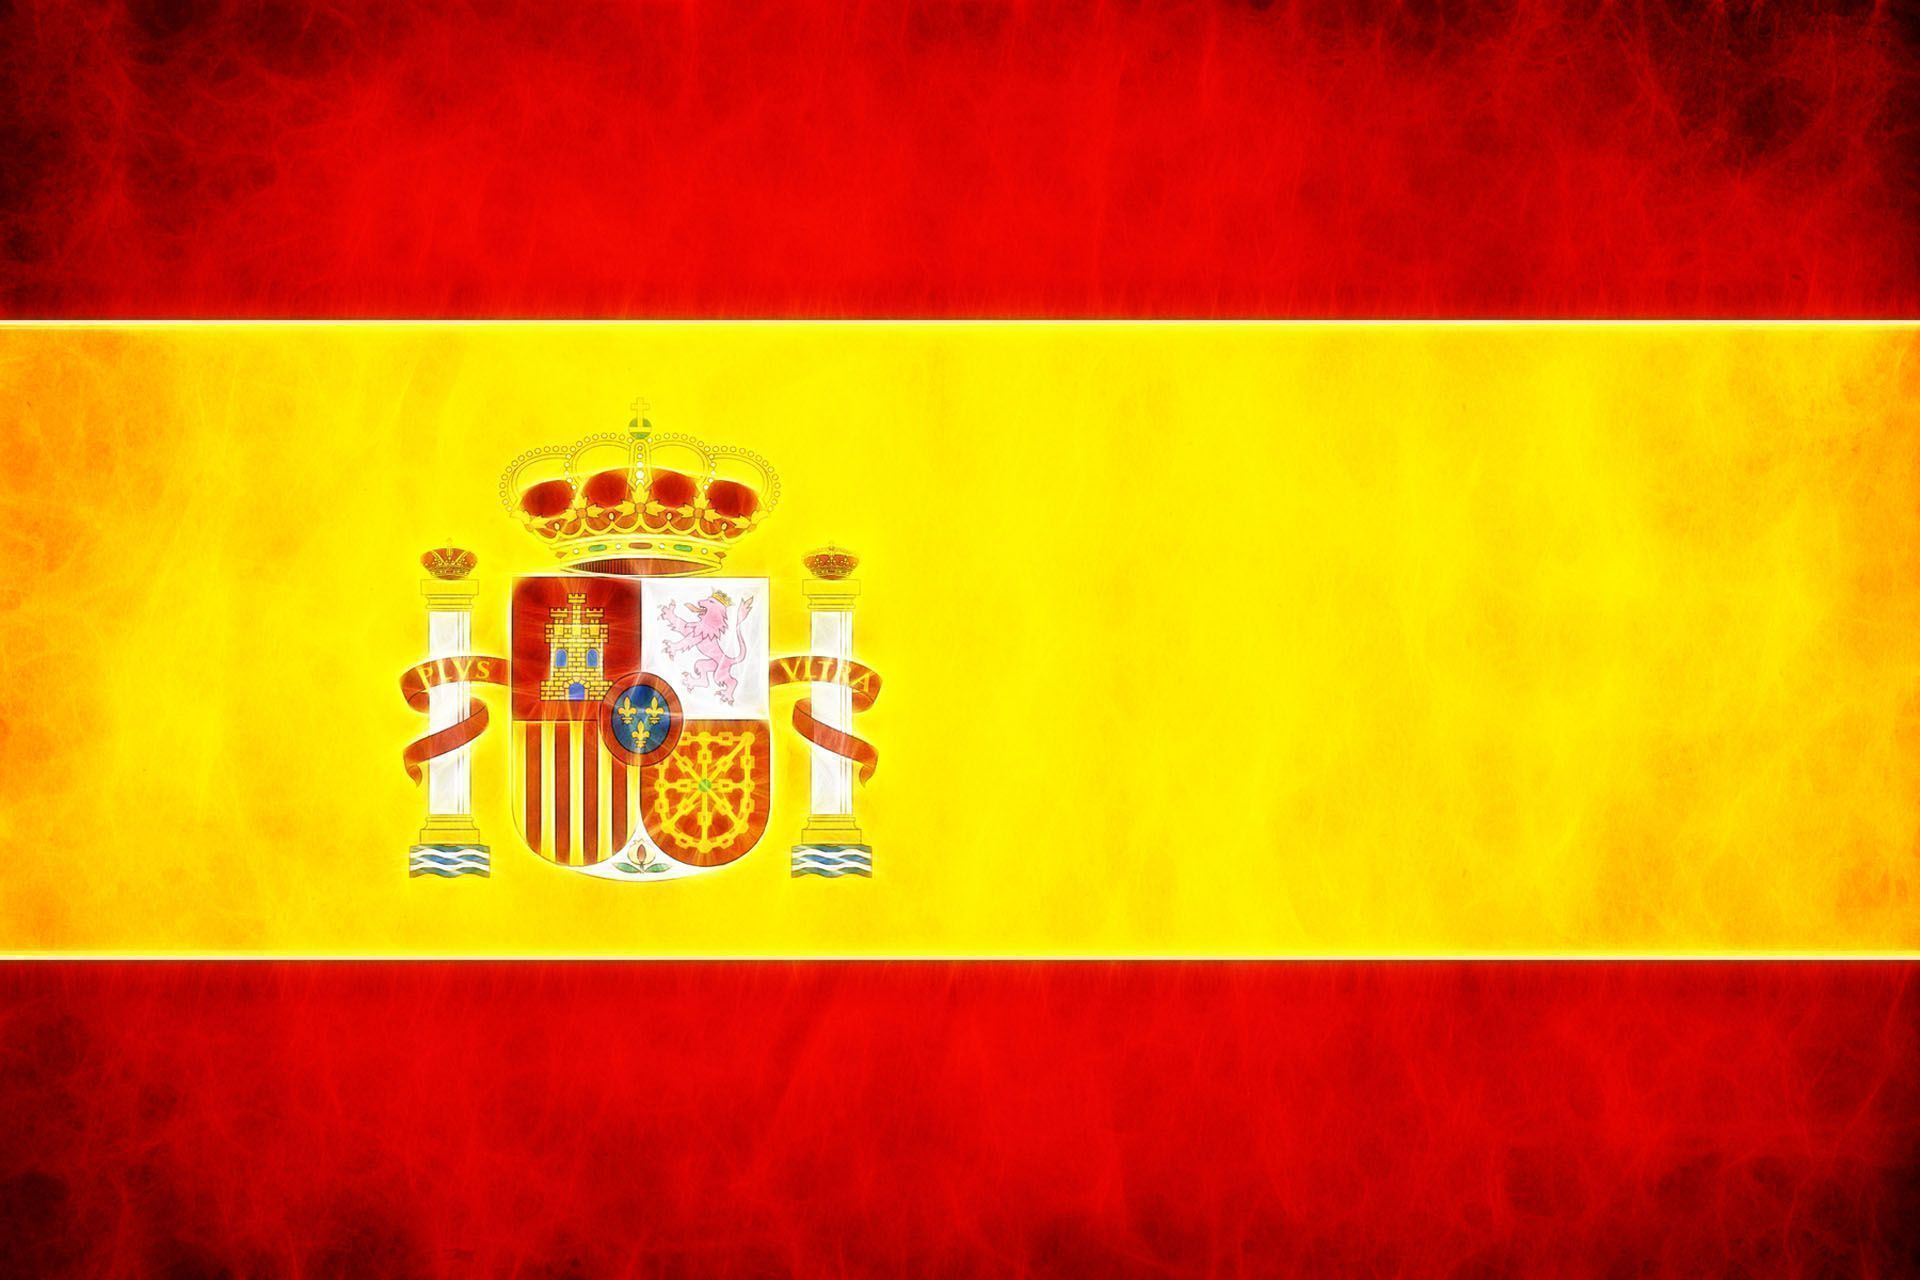 COOL SPANISH WORDS. Spanish from Spain. Spanish courses, Spain flag, Learn another language